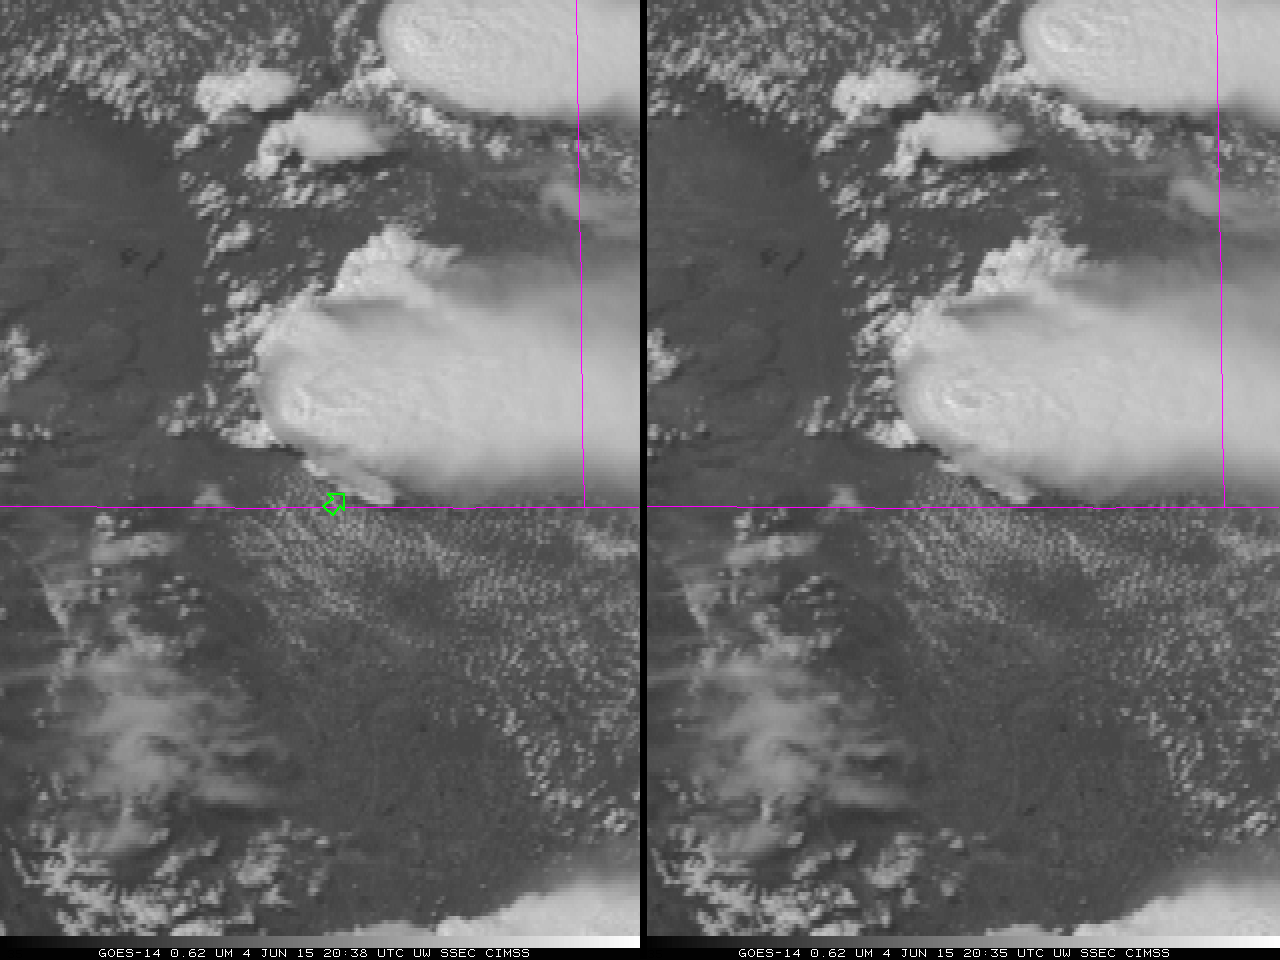 GOES-14 Visible (0.6263 µm) Imagery, 04 June 2015.  1-minute imagery on the left, 5-minute imagery on the right (click to play animation)